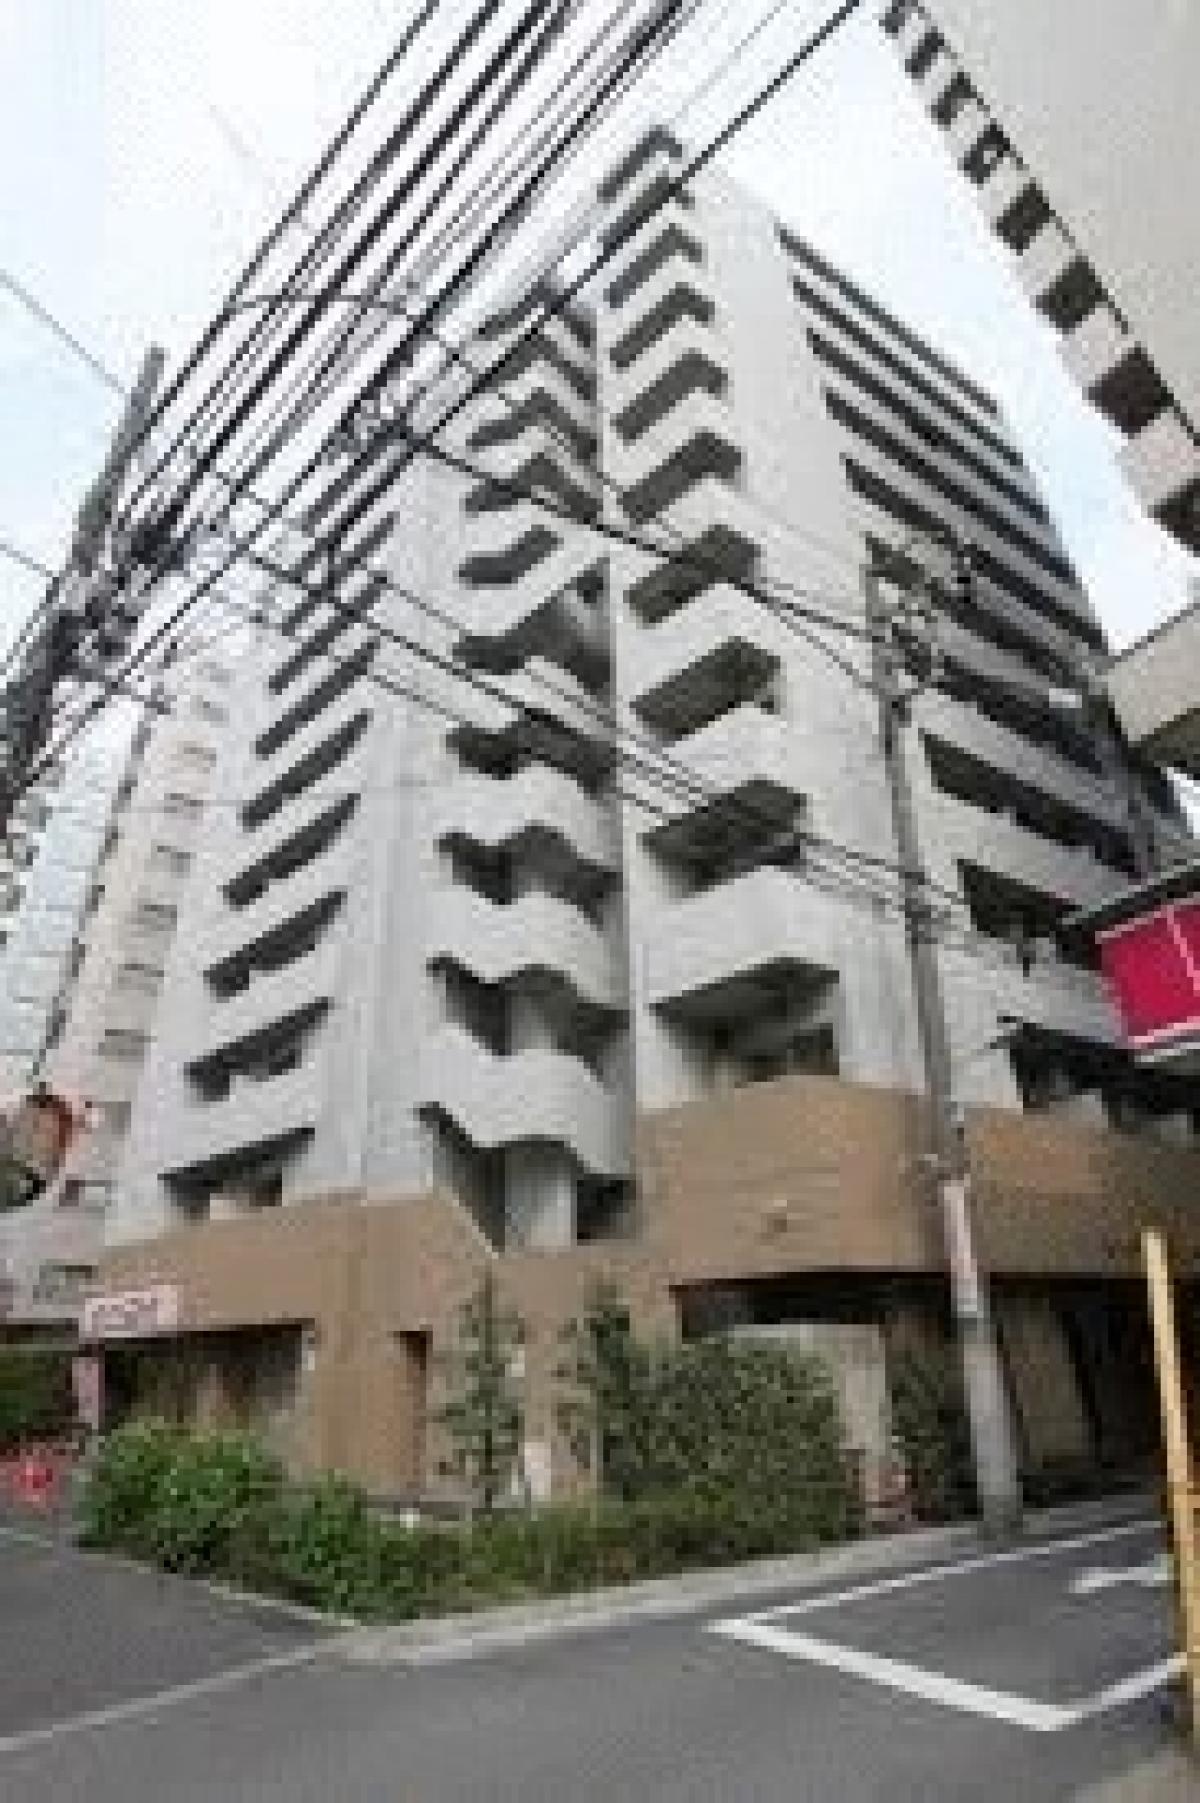 Picture of Apartment For Sale in Toshima Ku, Tokyo, Japan